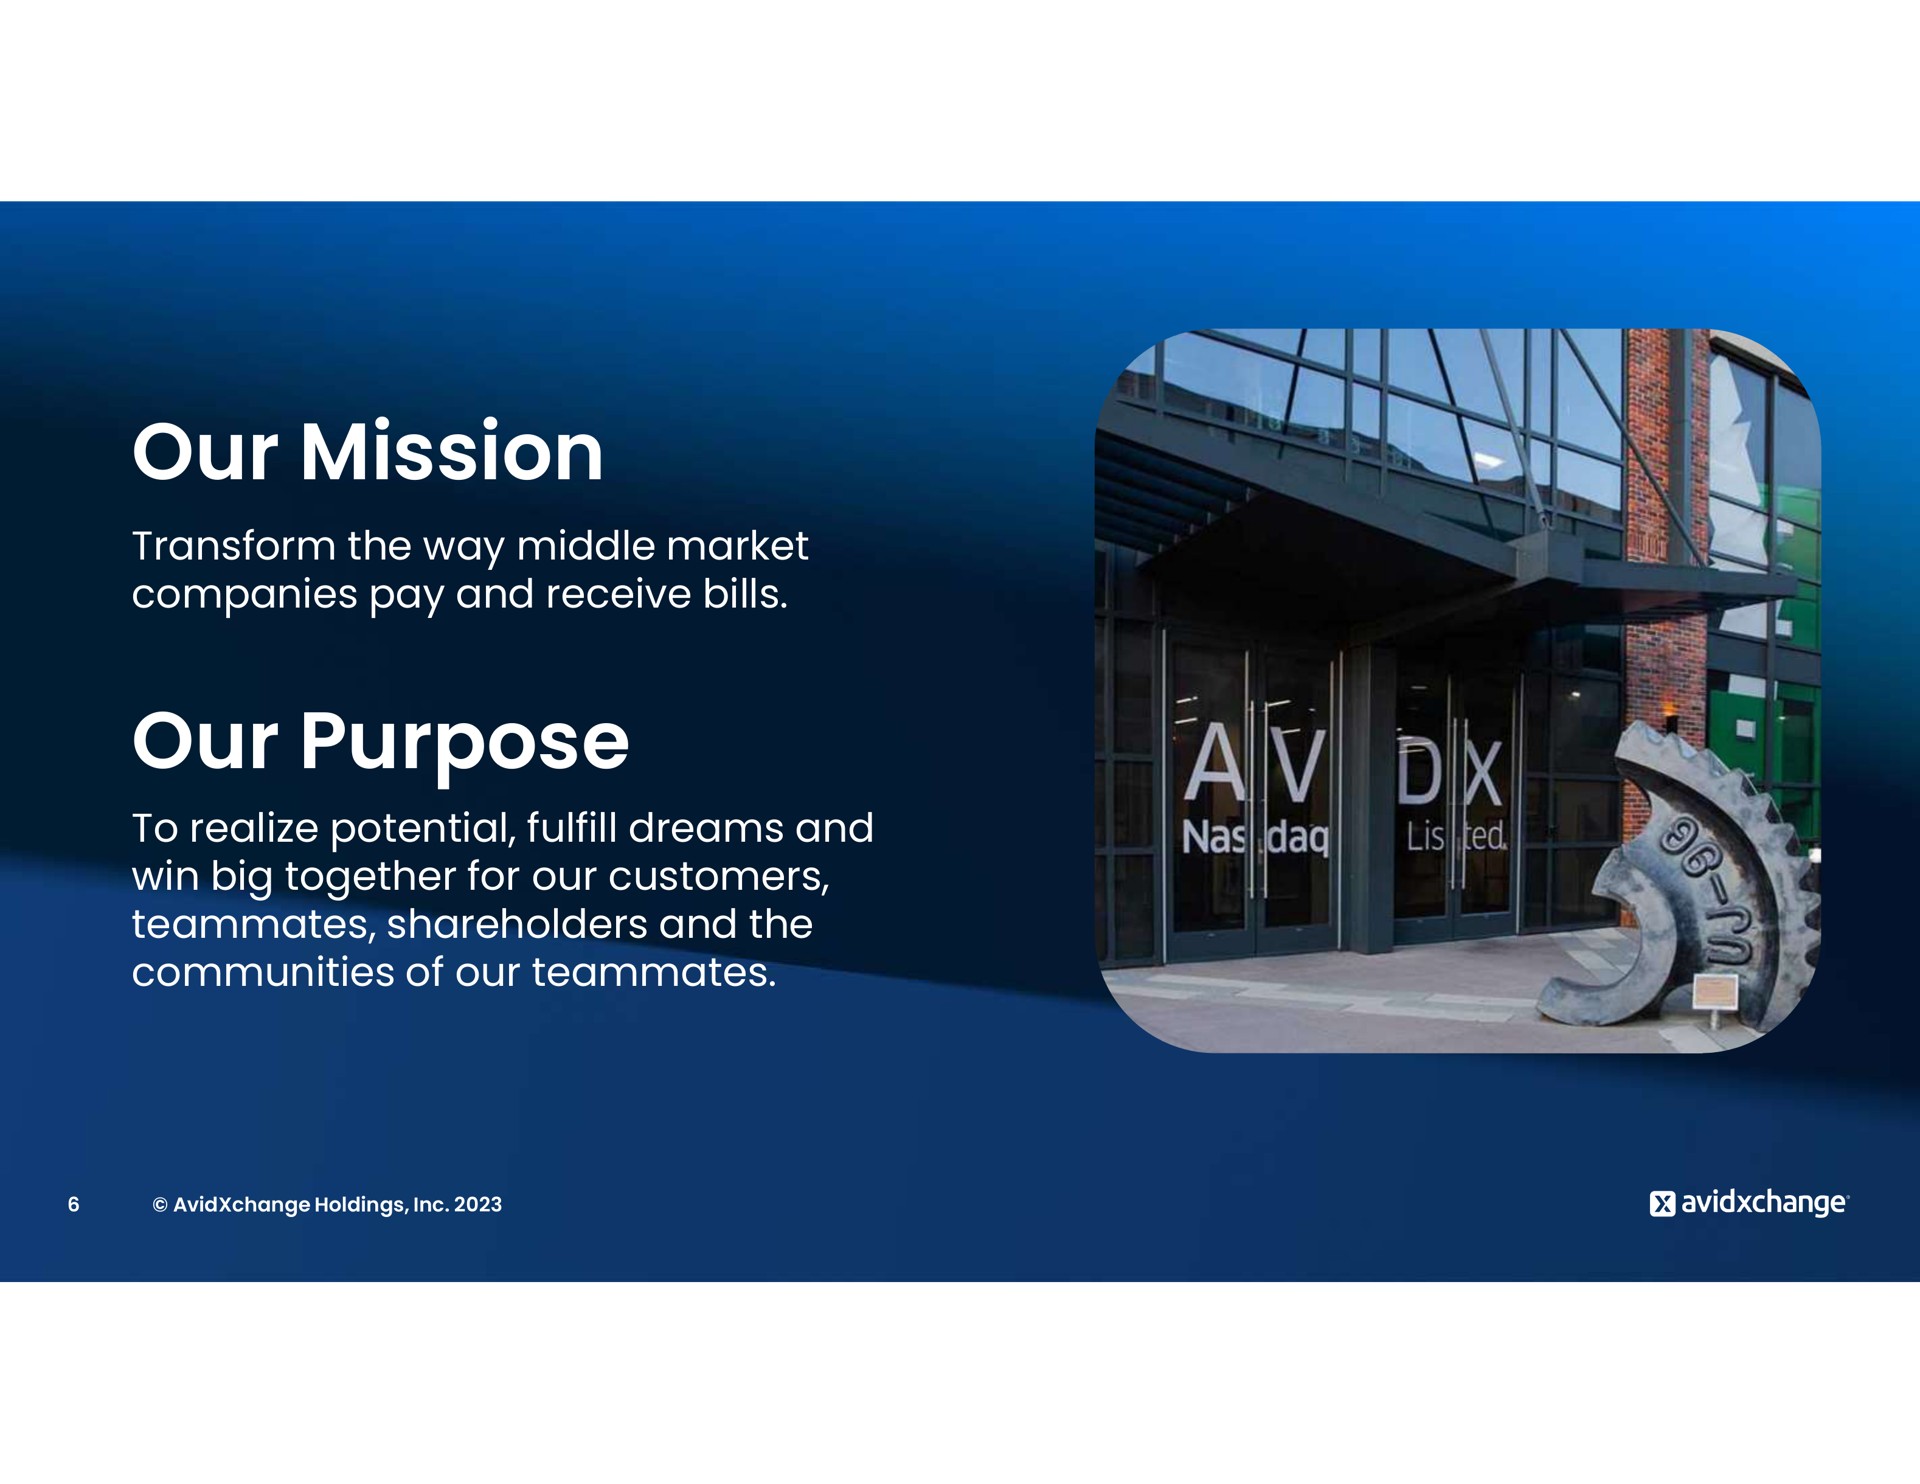 our mission our purpose | AvidXchange